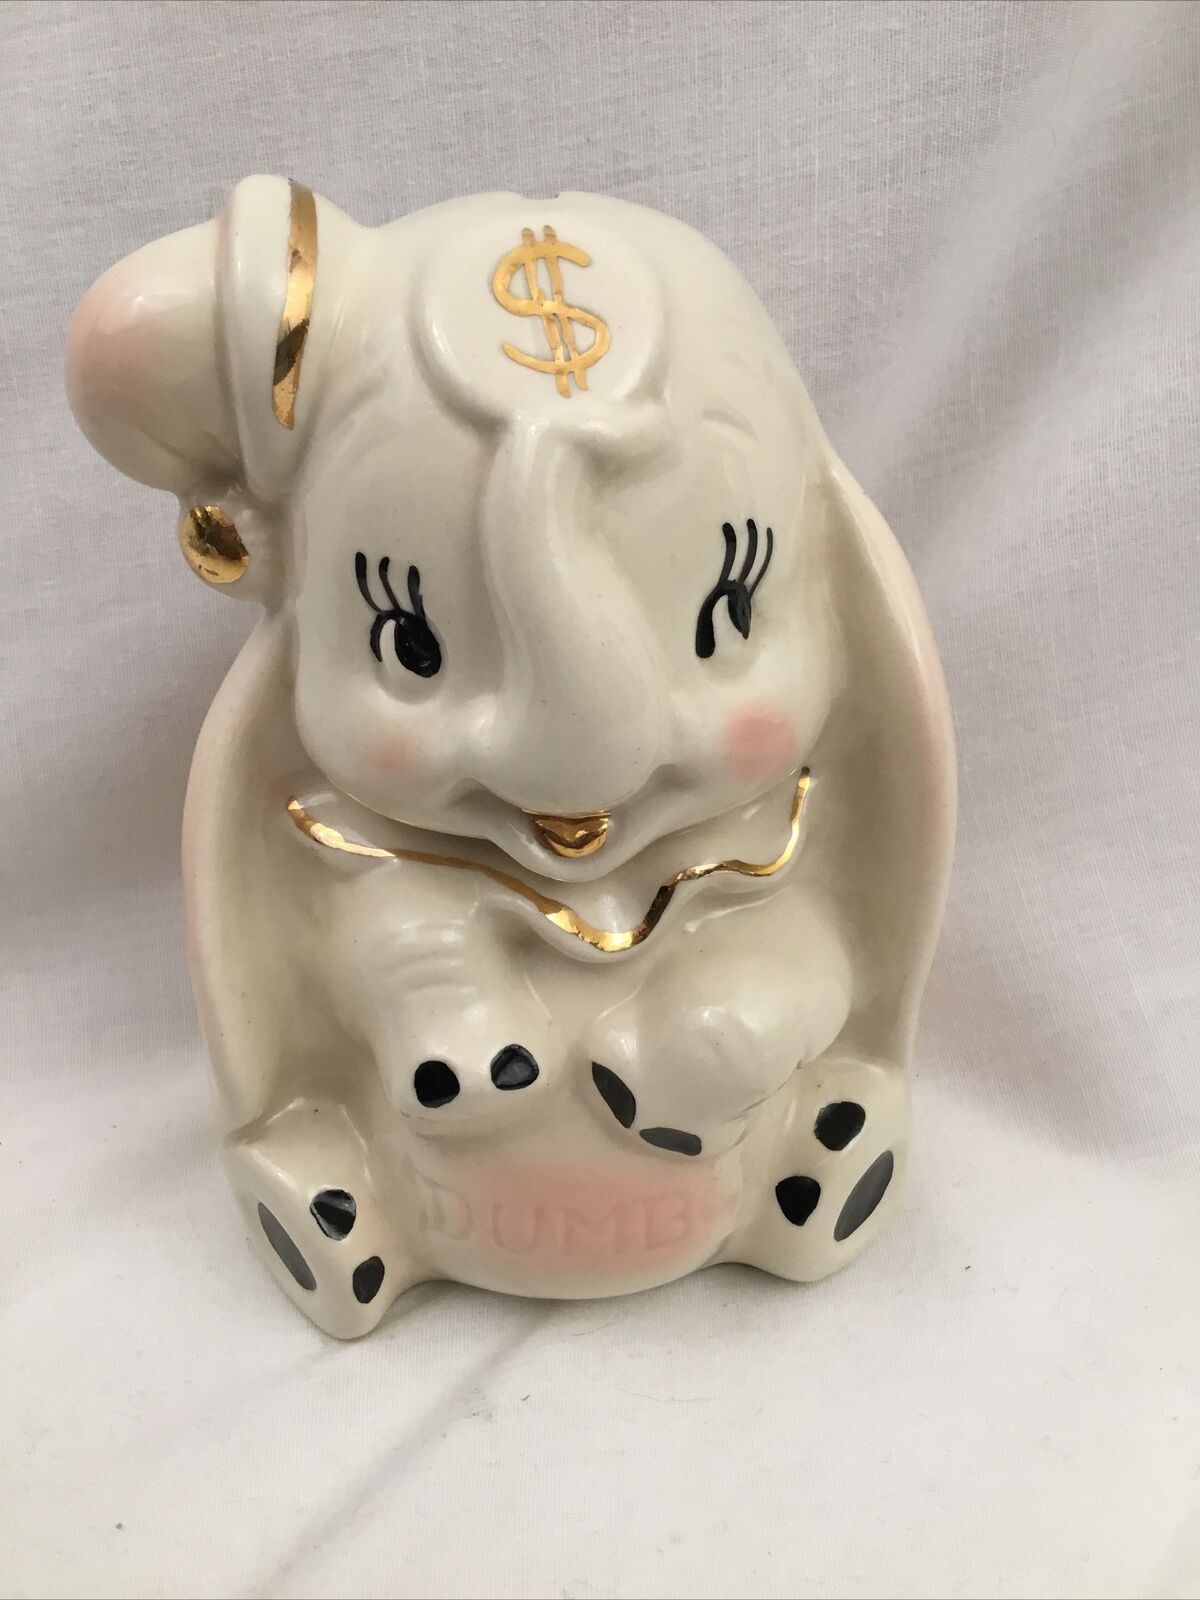 Vintage Walt Disney Dumbo Coin Bank Made In USA 1940's Pink Accents NICE